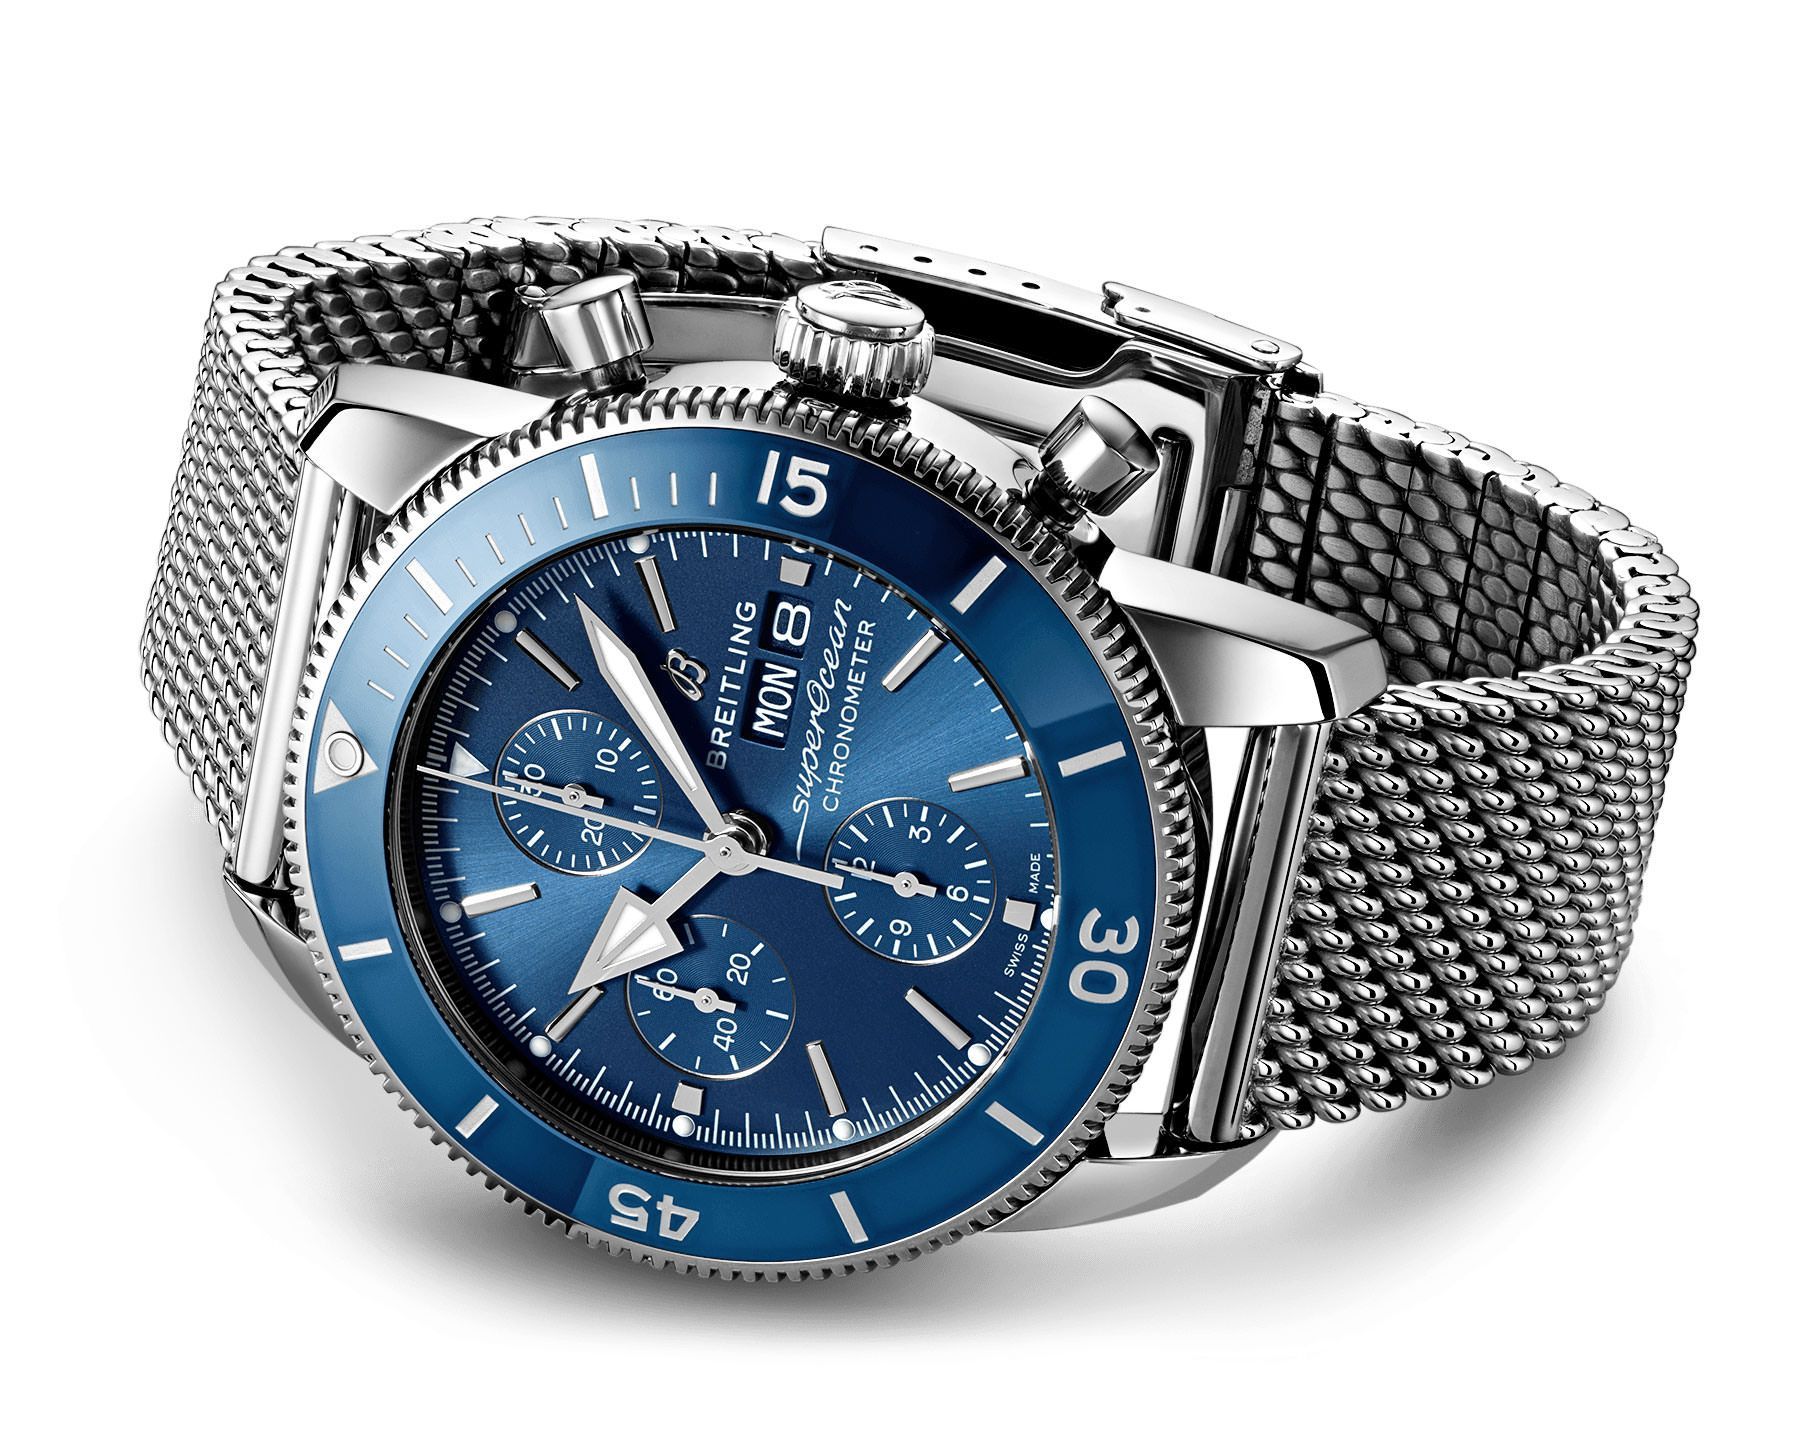 Breitling  44 mm Watch in Blue Dial For Men - 4